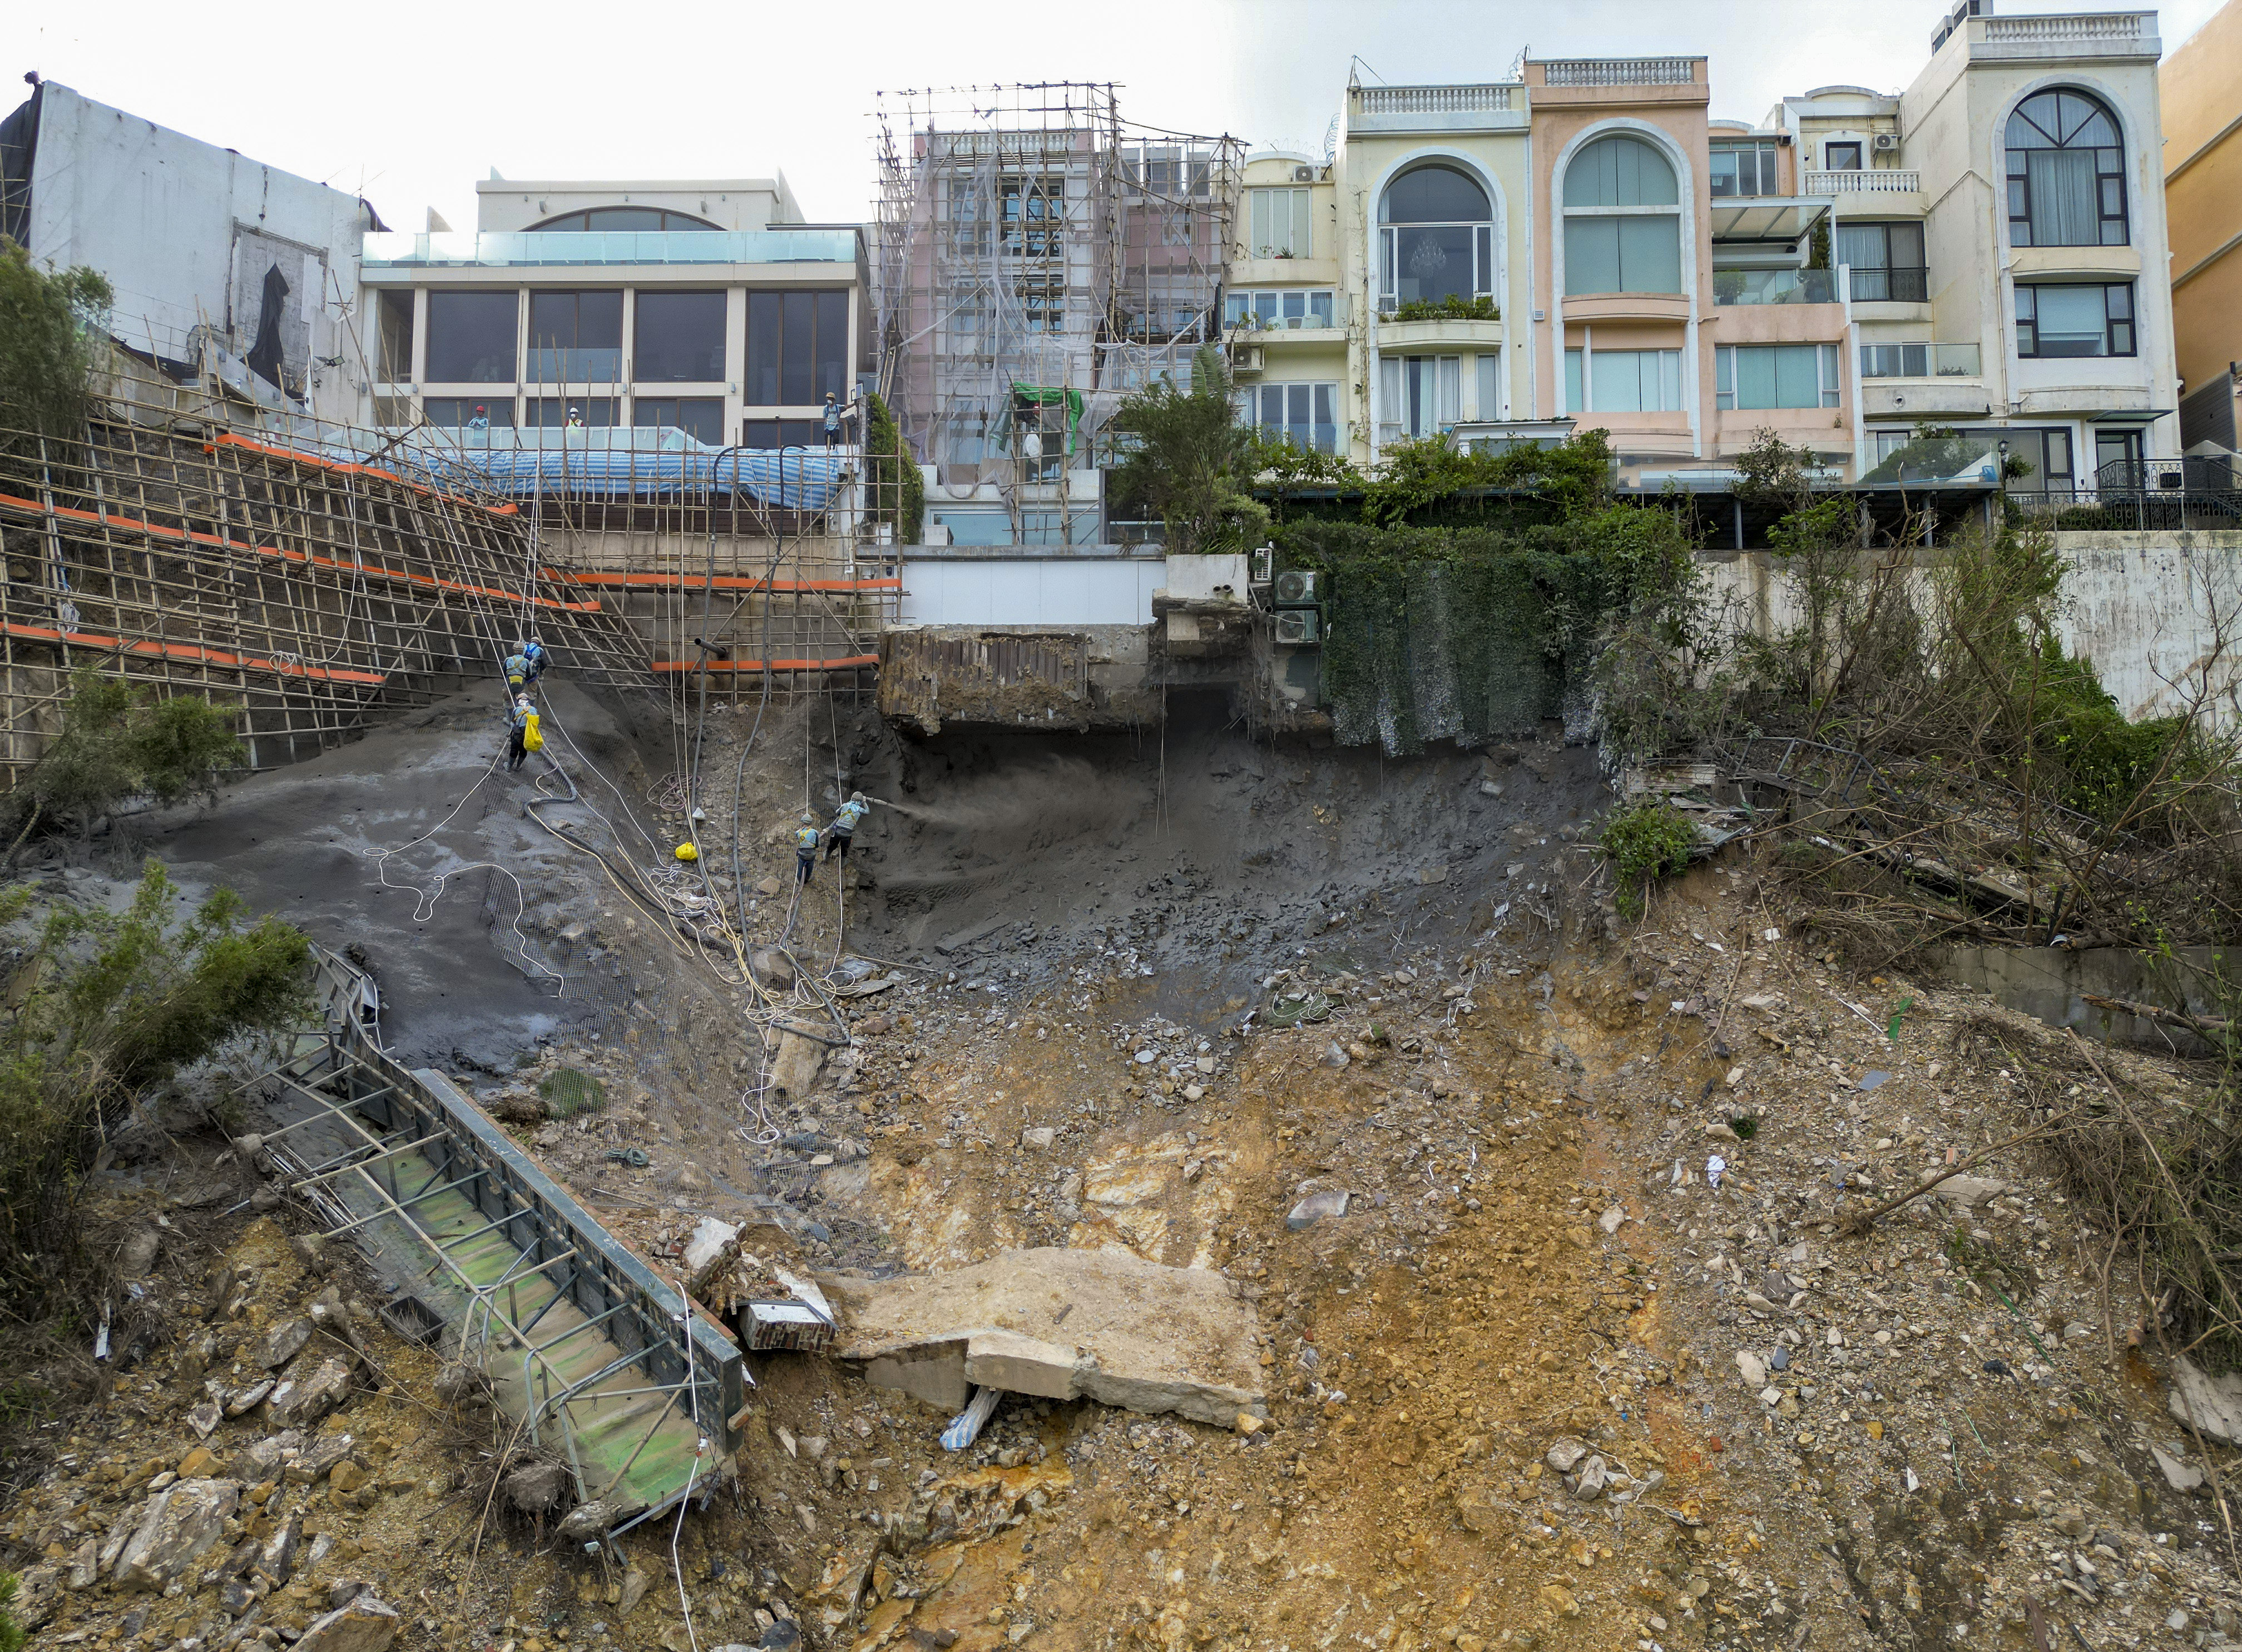 Part of the slope at Redhill Peninsula estate collapsed after the record rainfall last week. Photo: Sam Tsang